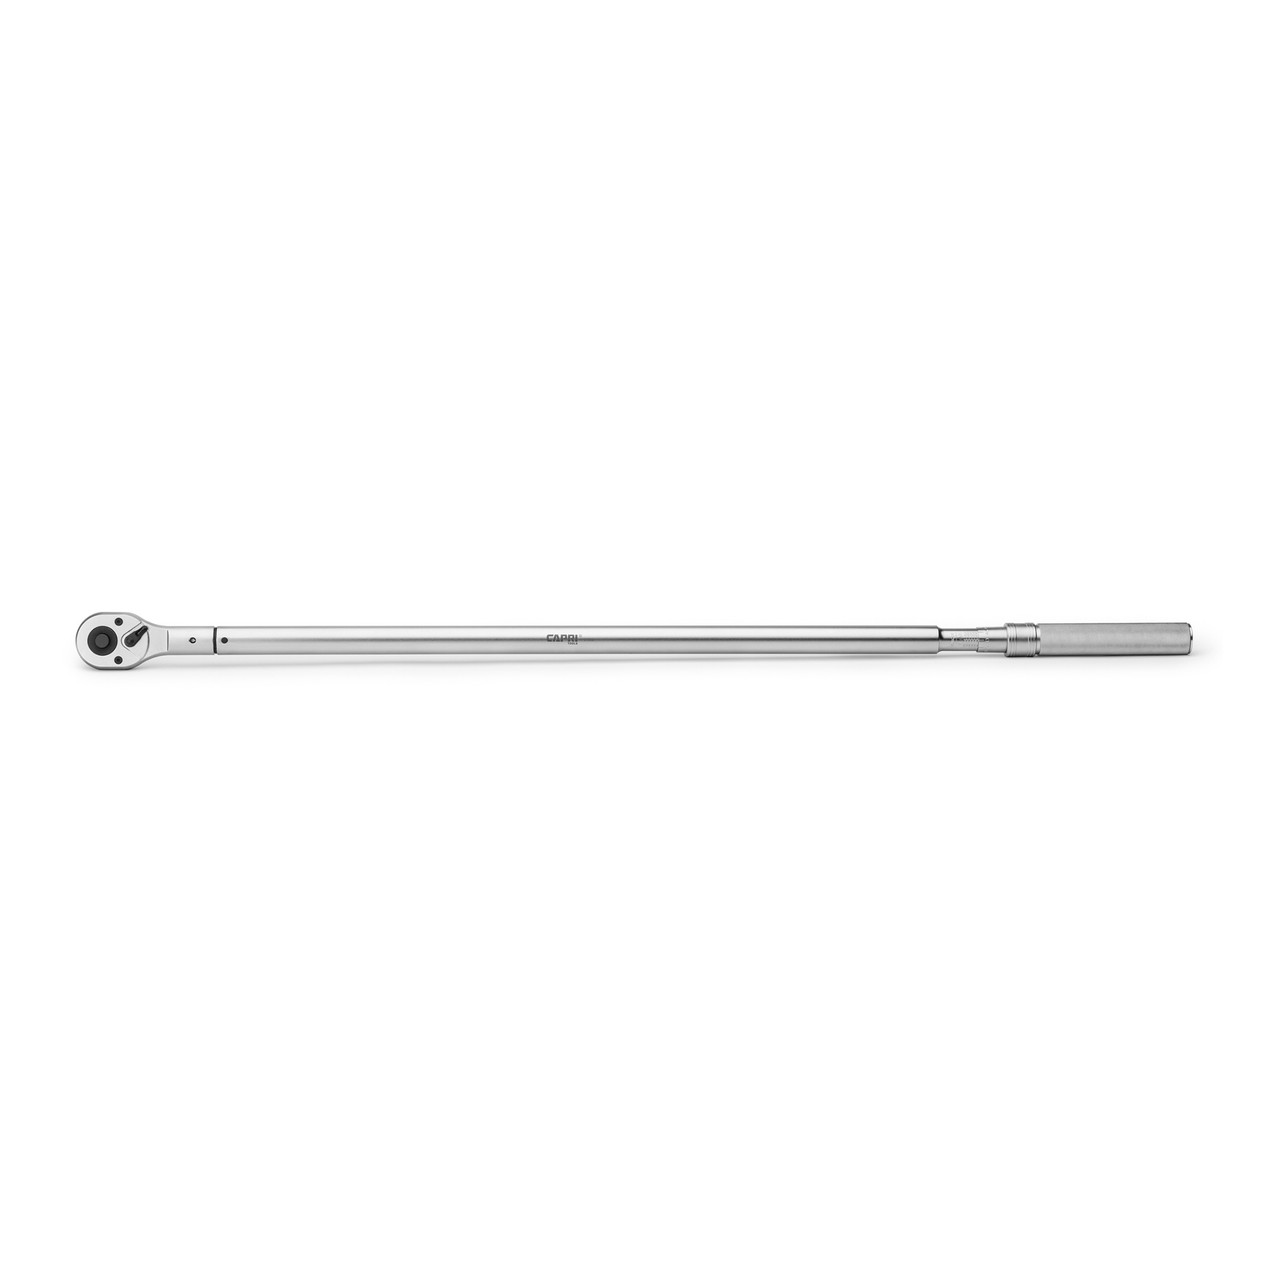 Capri Tools 150-750 Foot Pound Industrial Torque Wrench, 1"", Matte Chrome